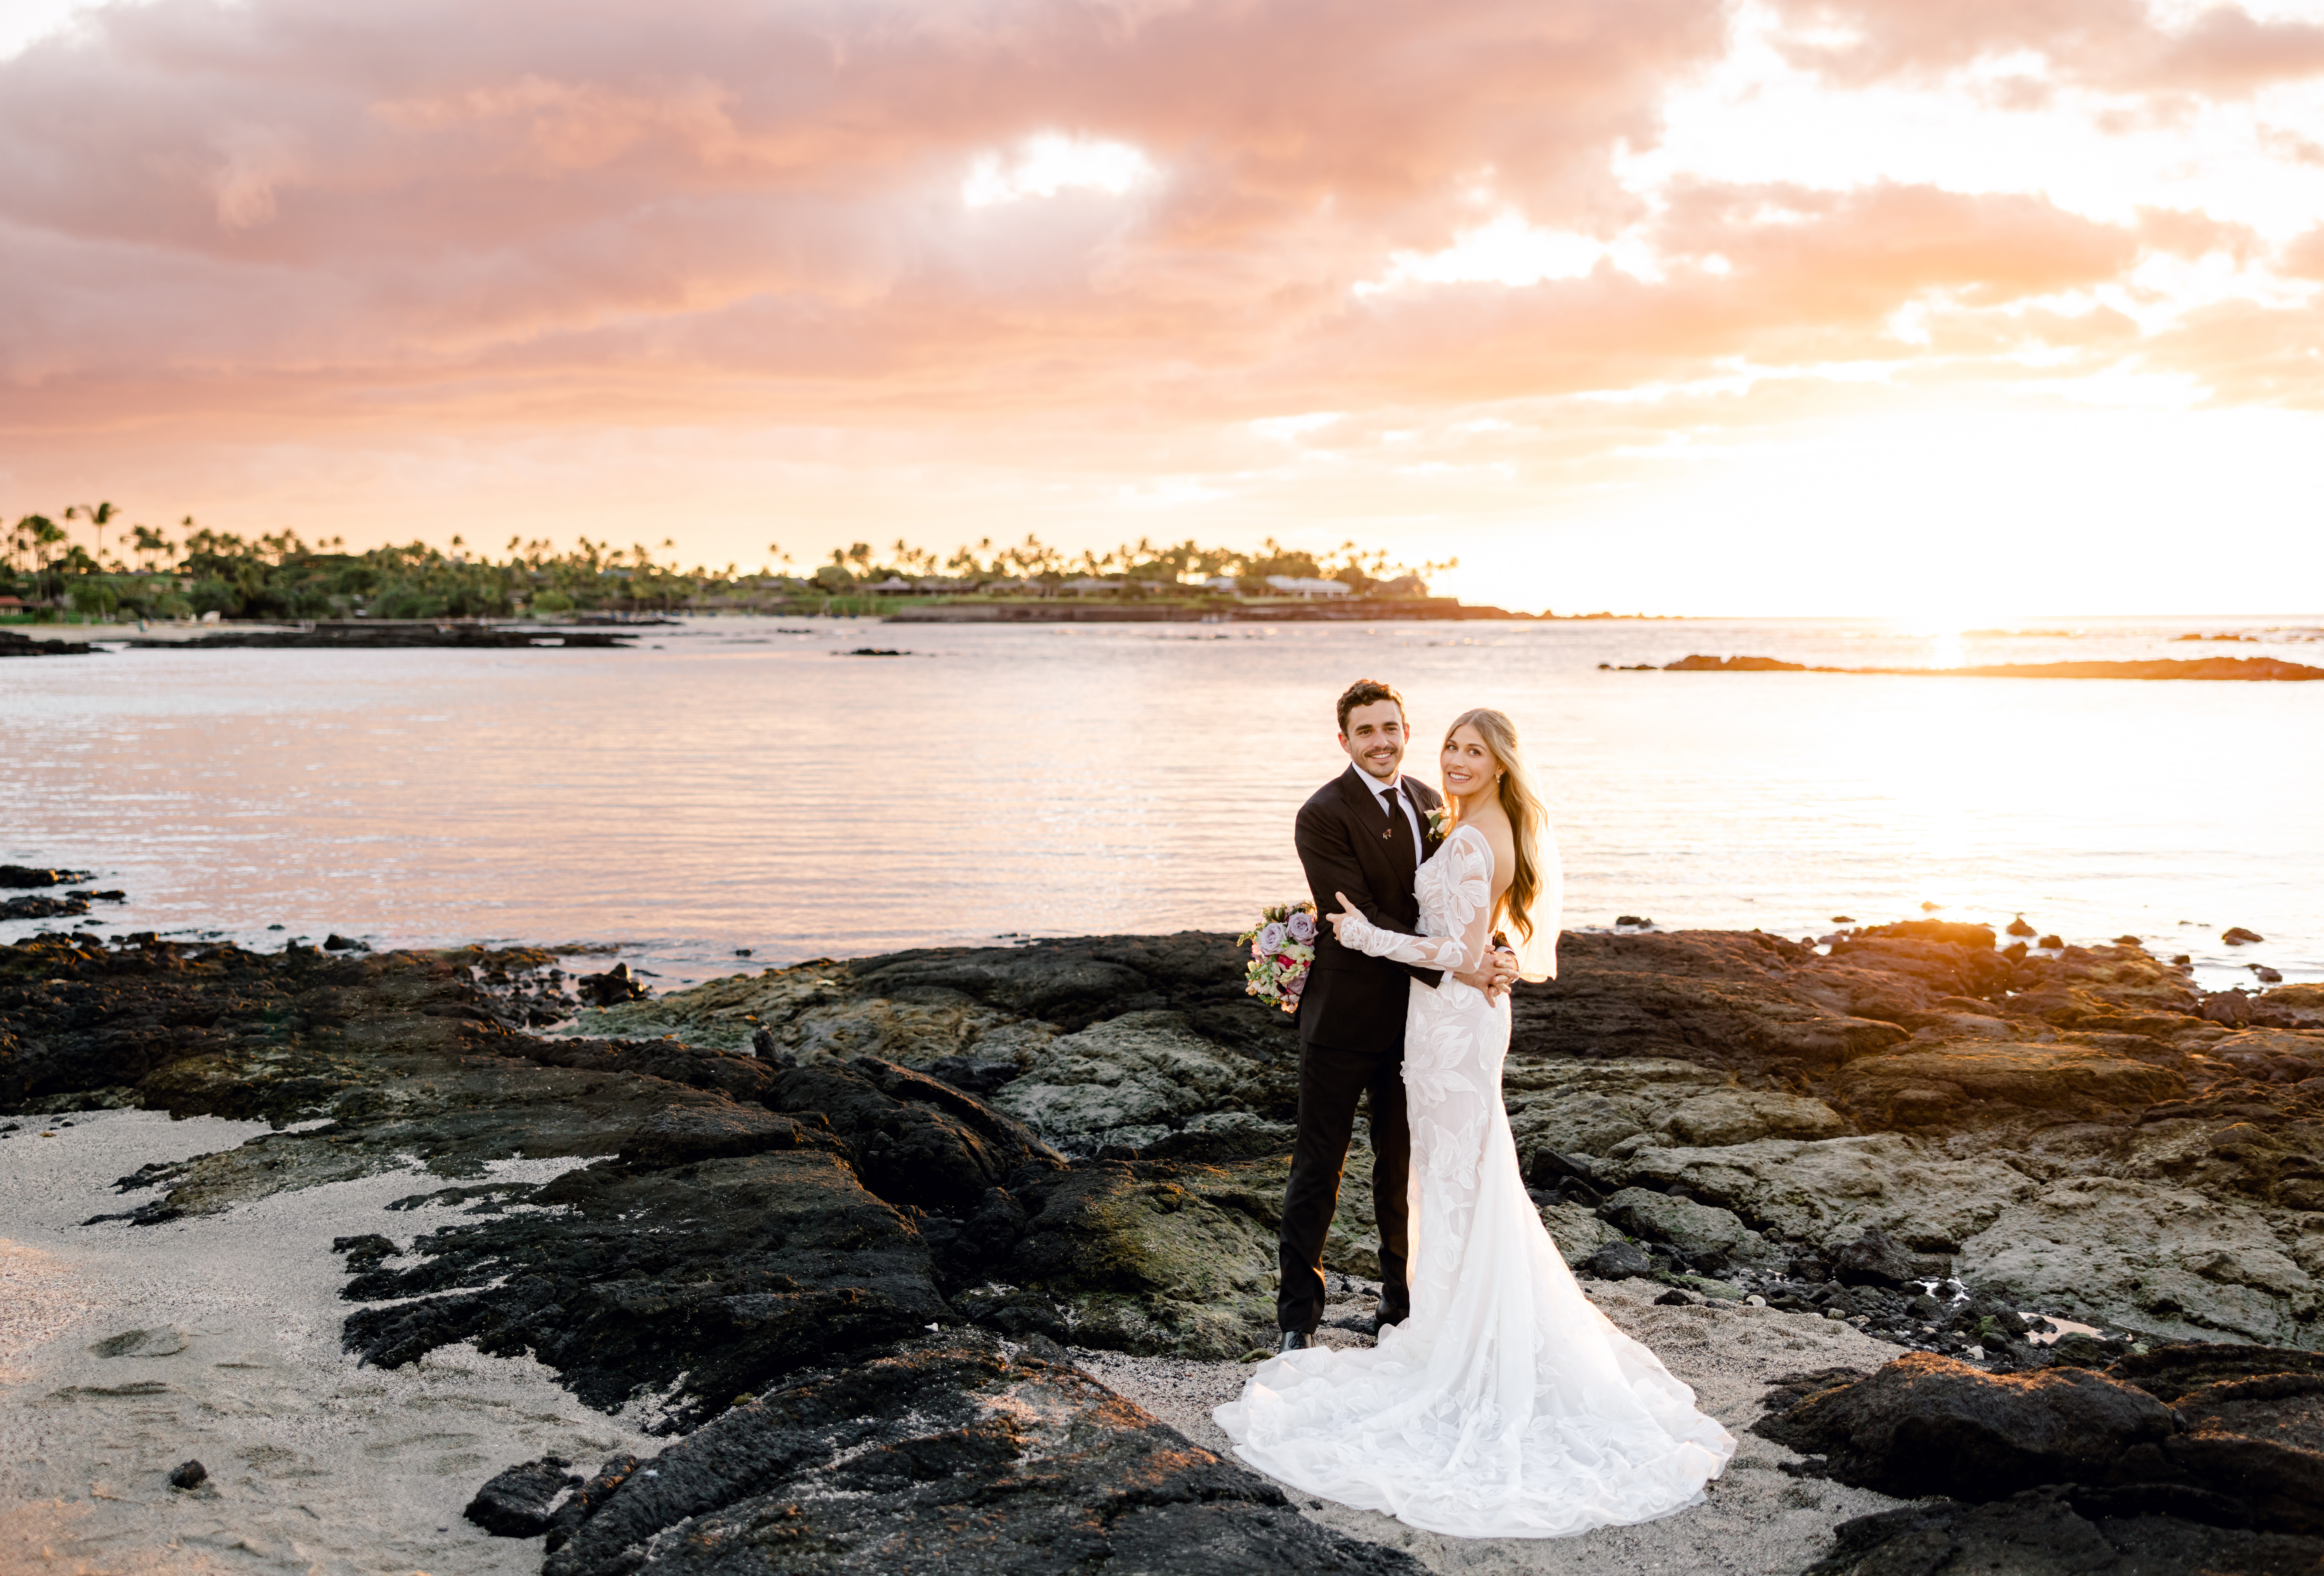 Groom and bride portraits holding slowers are hugging while standing at the beach resort Mauna Lani during sunset.